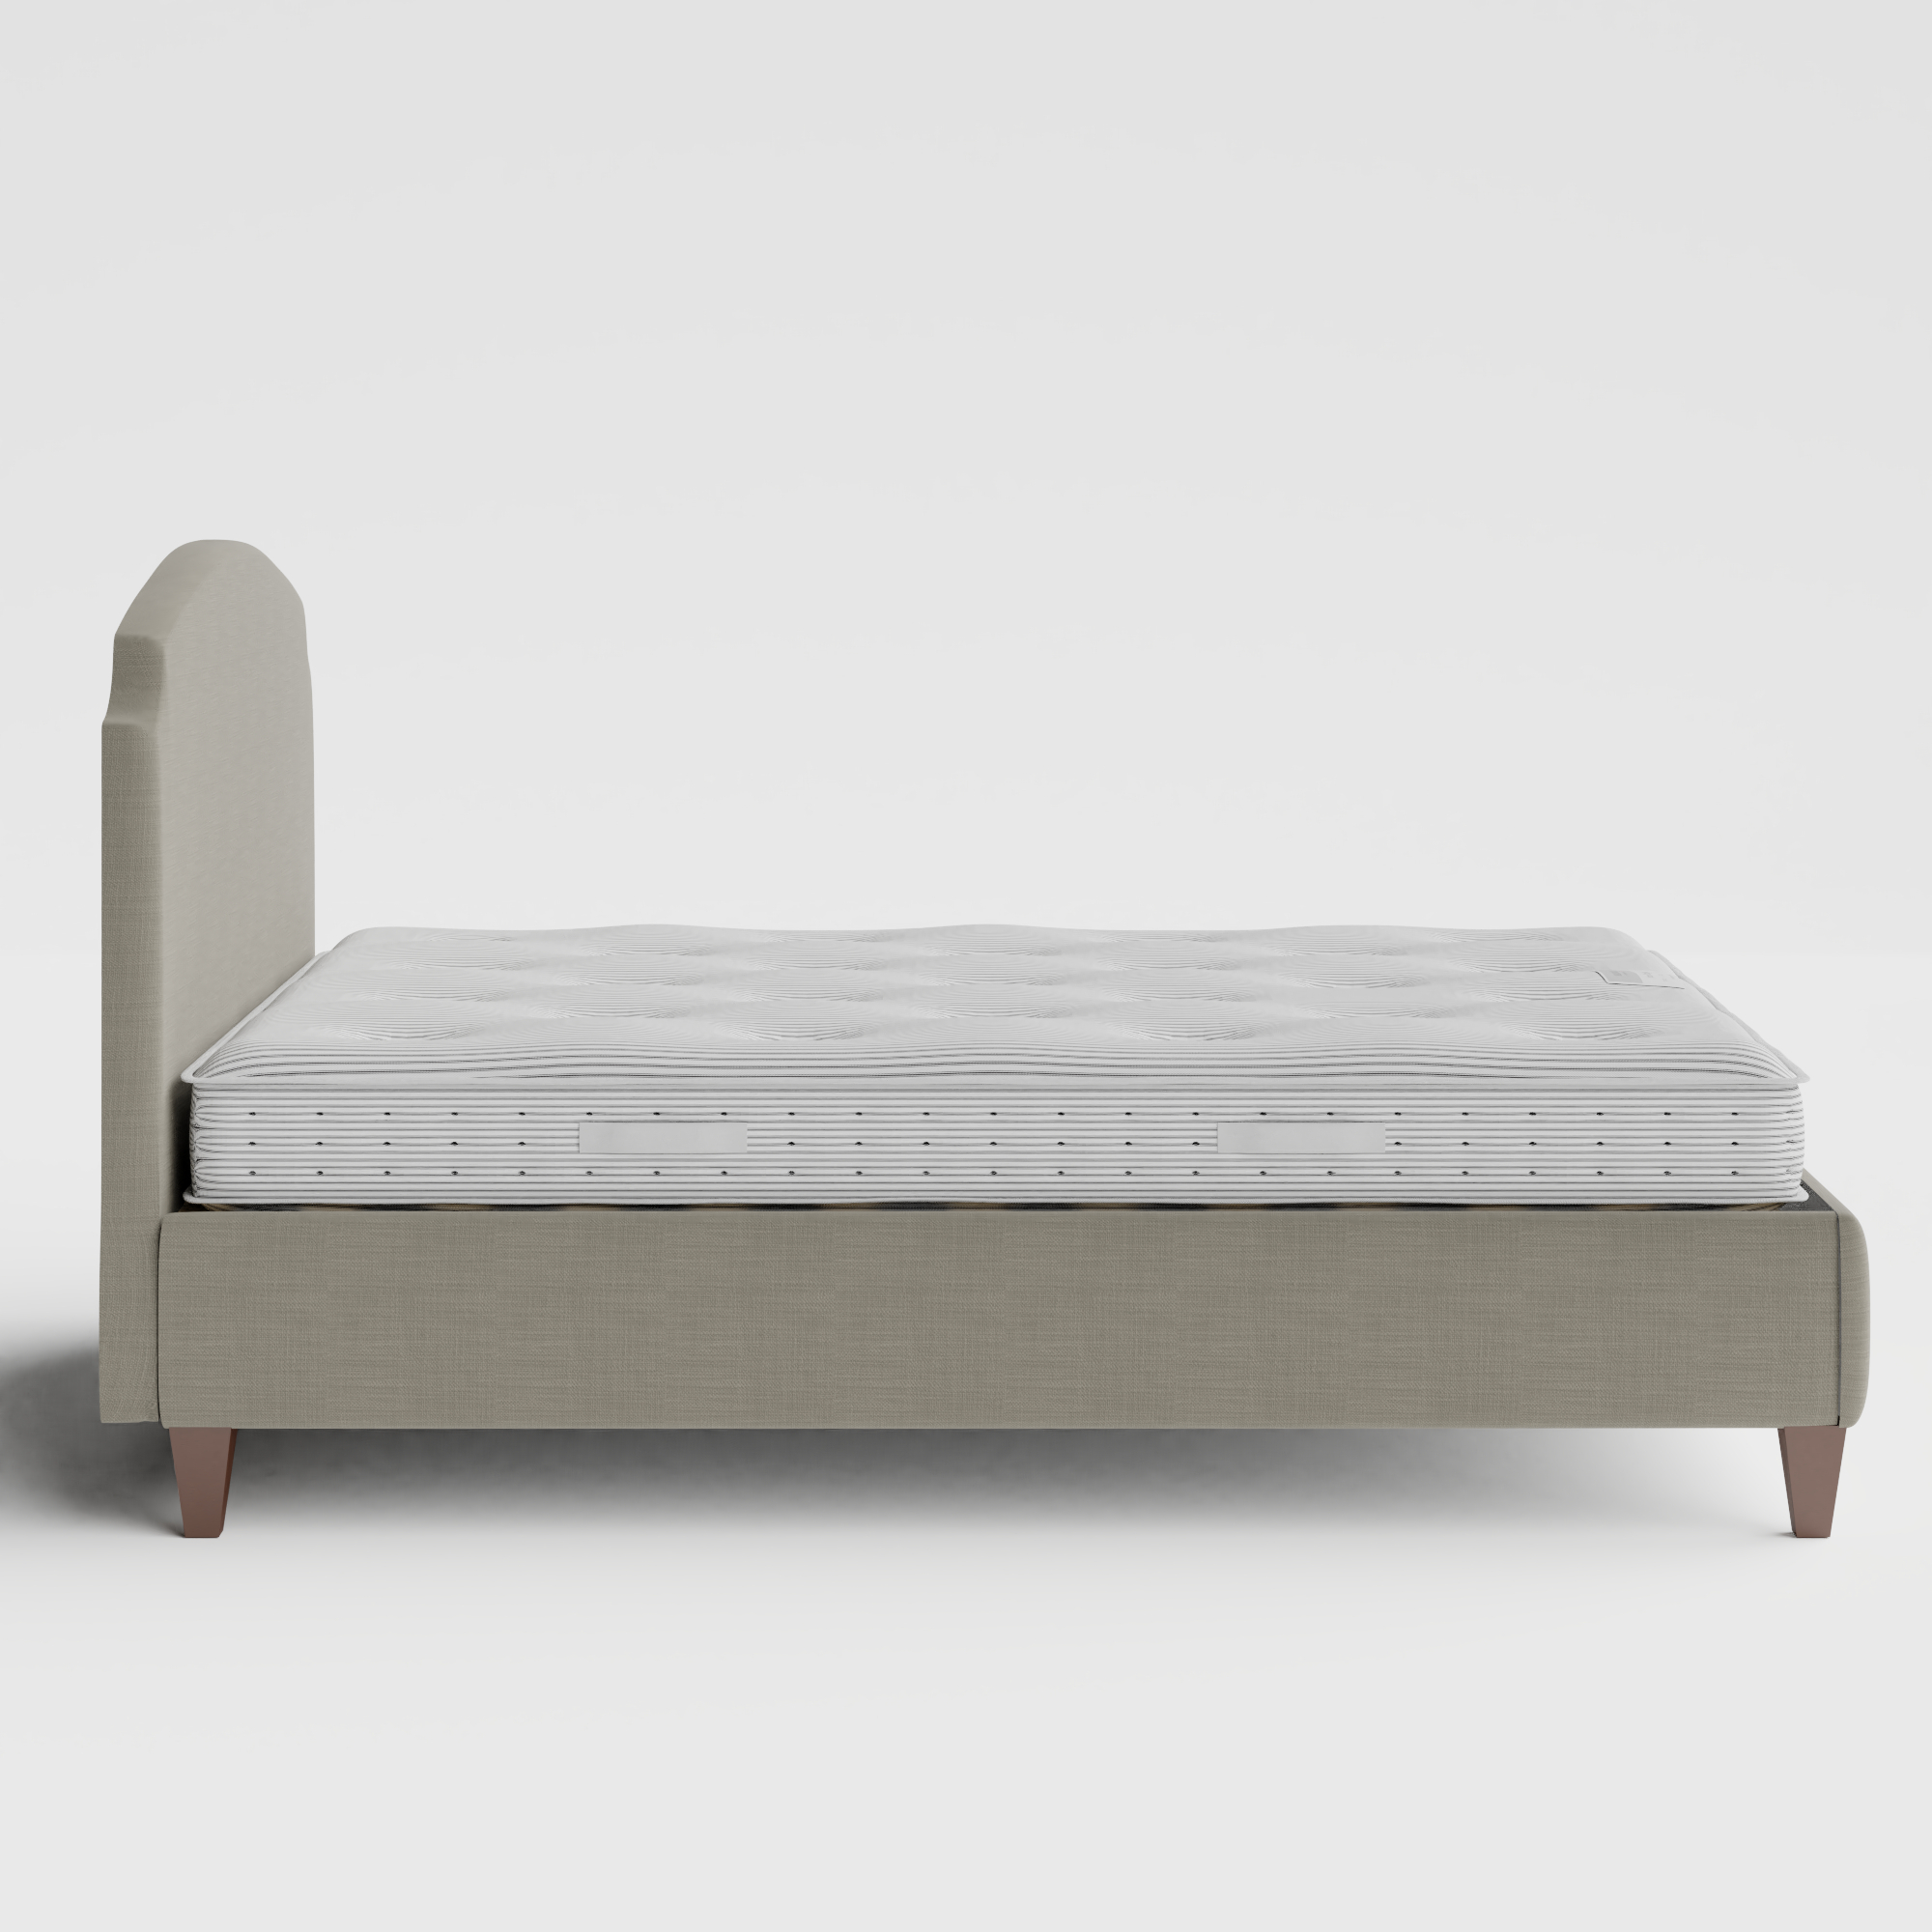 Lide upholstered bed in grey fabric with Juno mattress